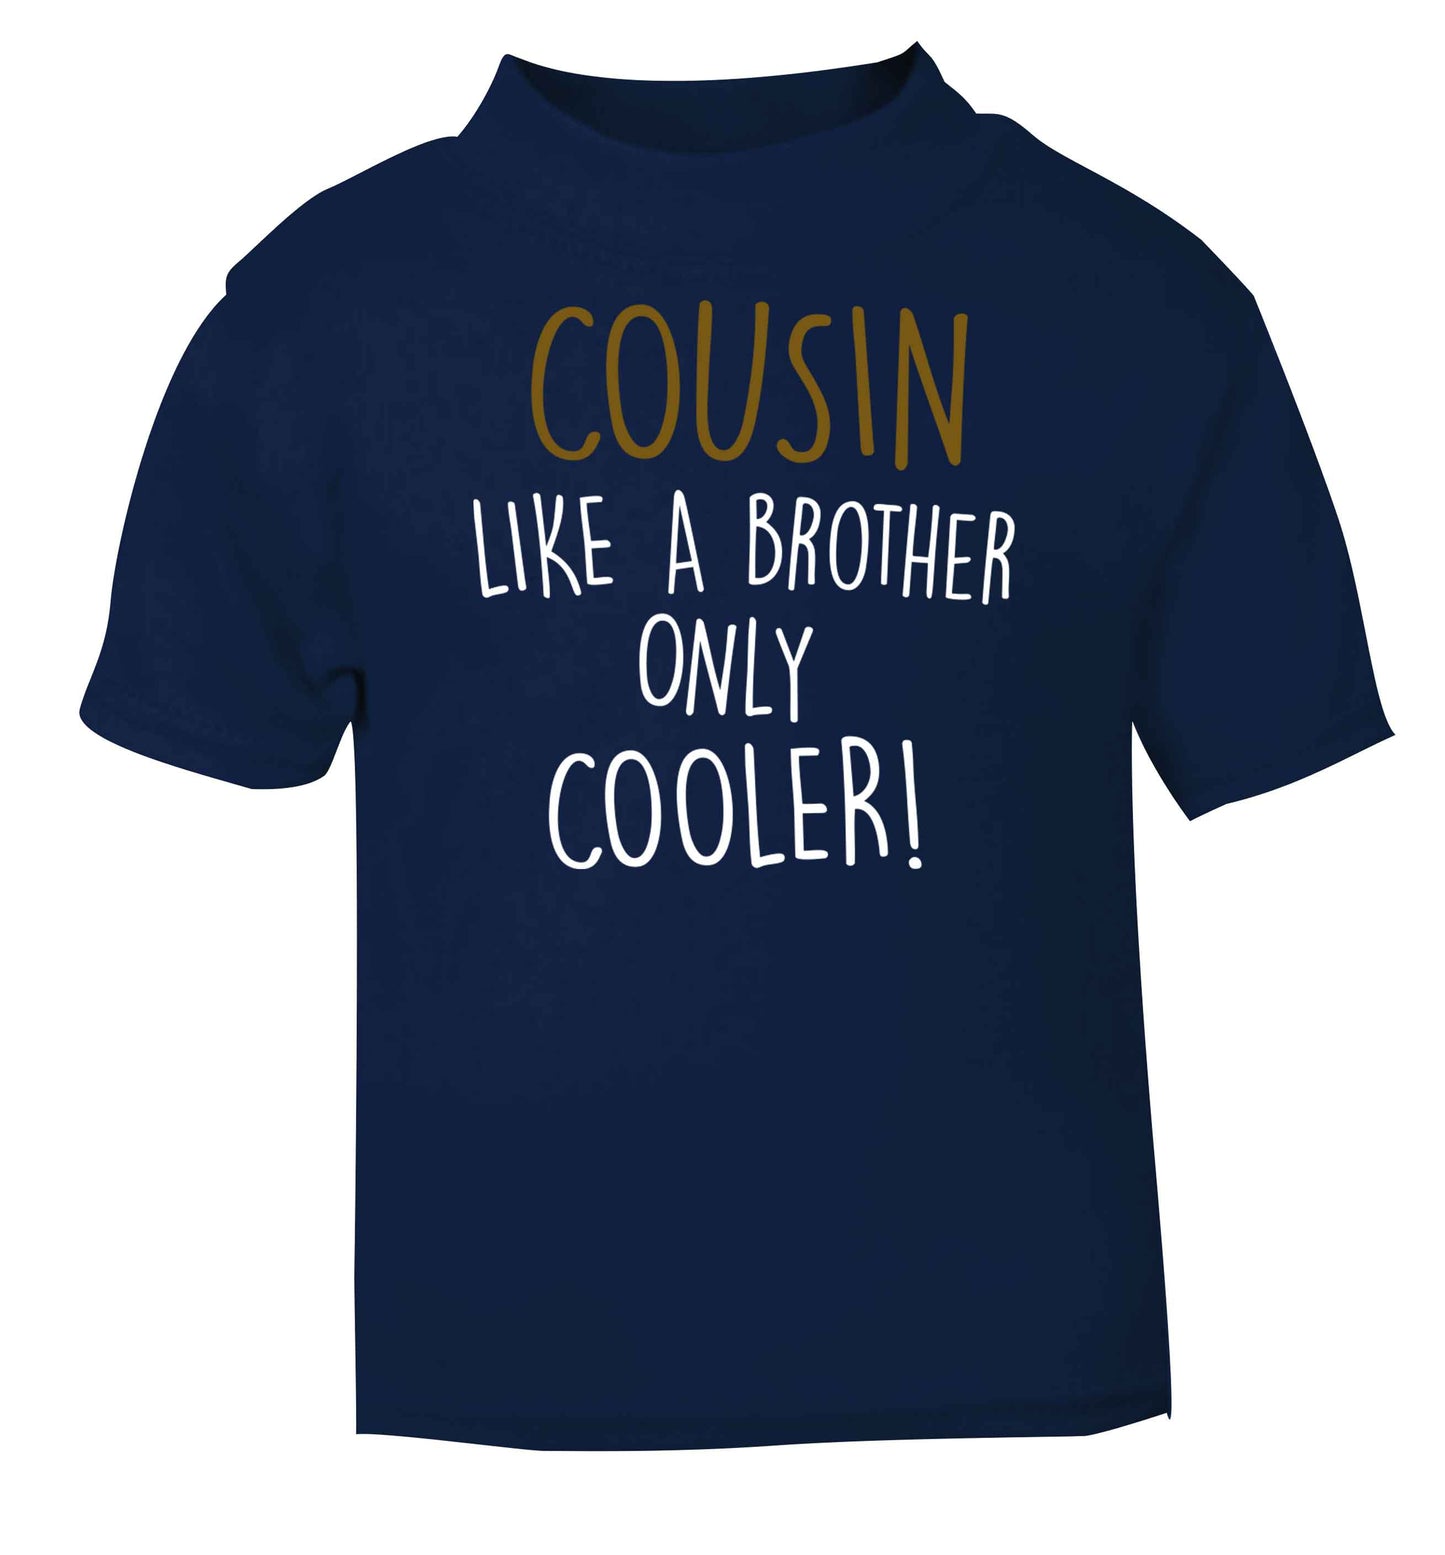 Cousin like a brother only cooler navy baby toddler Tshirt 2 Years